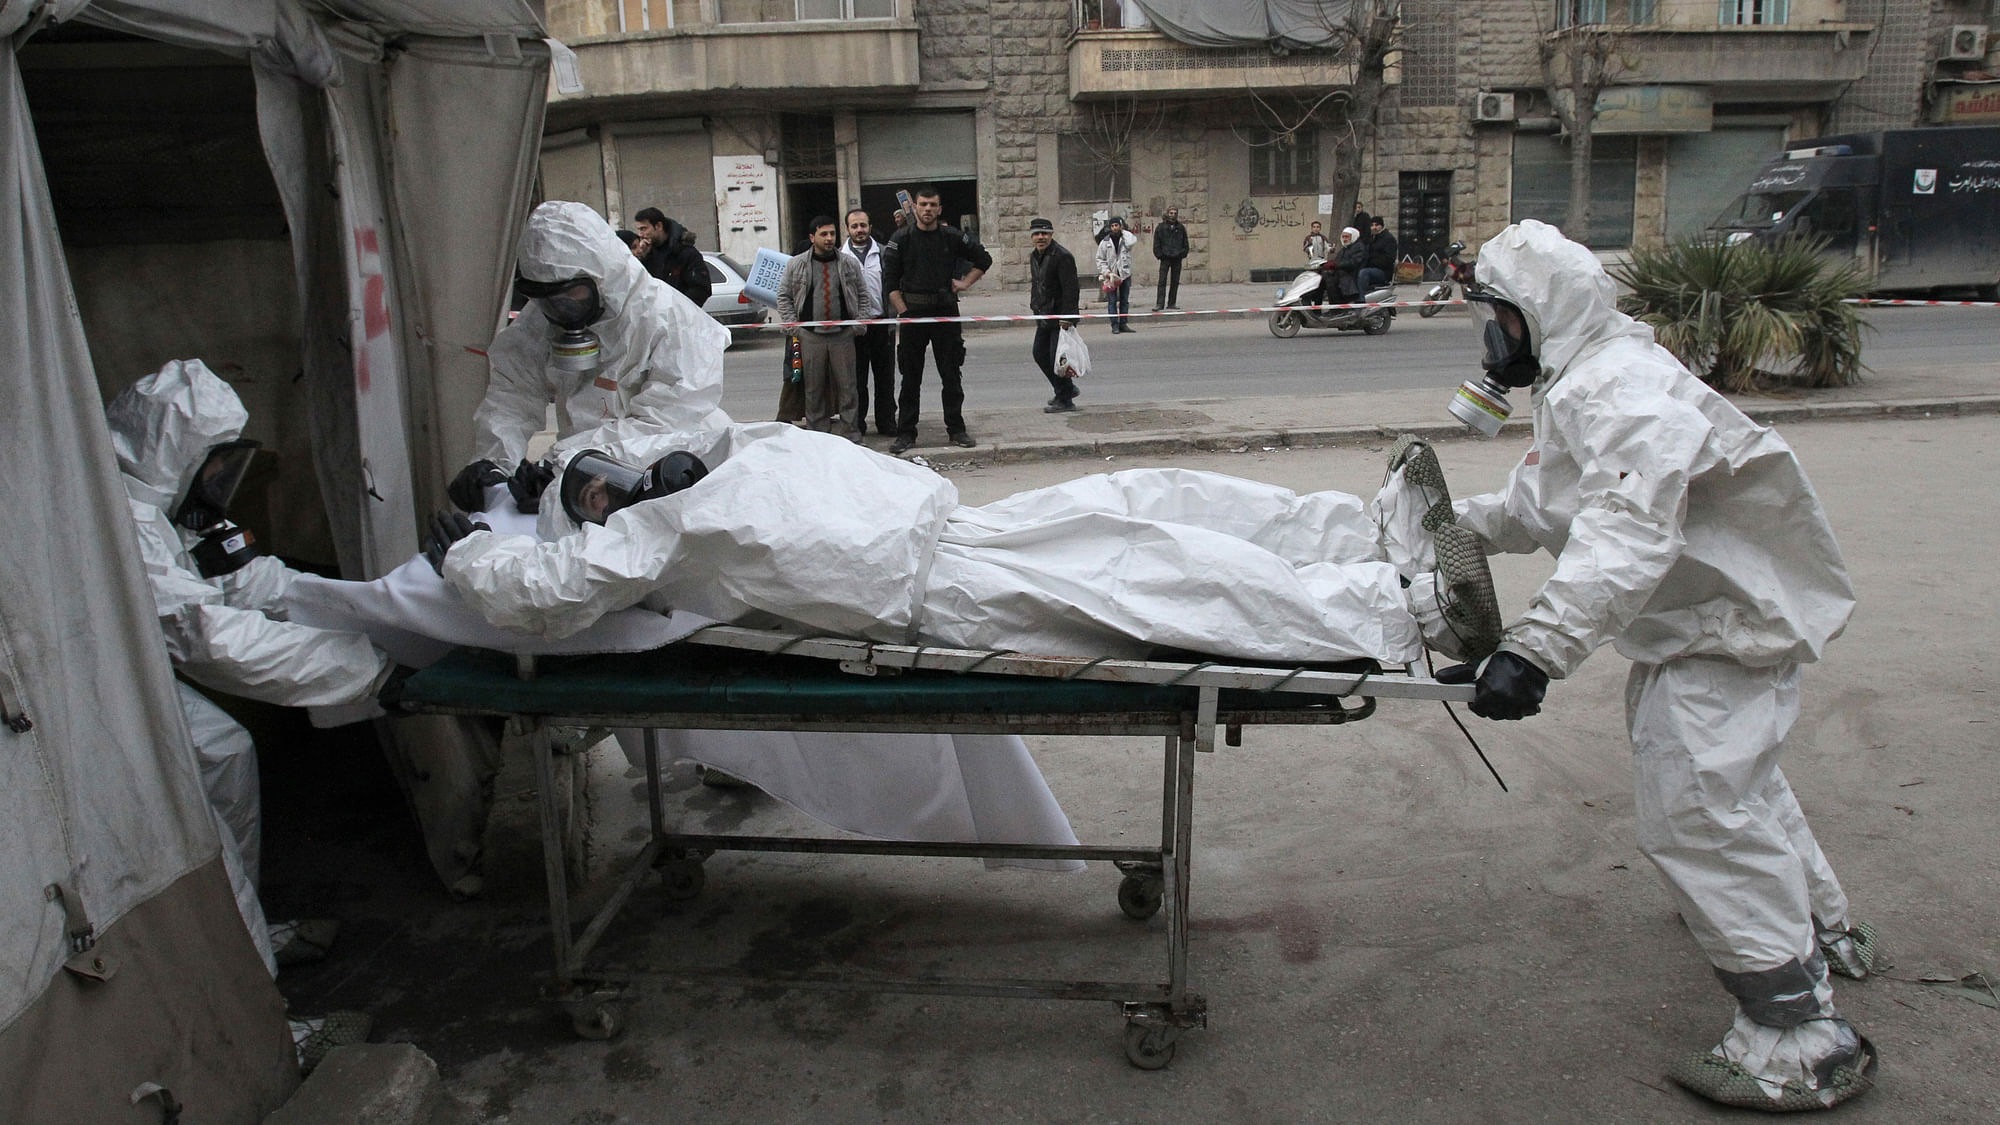 A Free Syrian Army medical group trains people on how to cope with chemical weapon attacks in Aleppo. (Photo: Reuters)